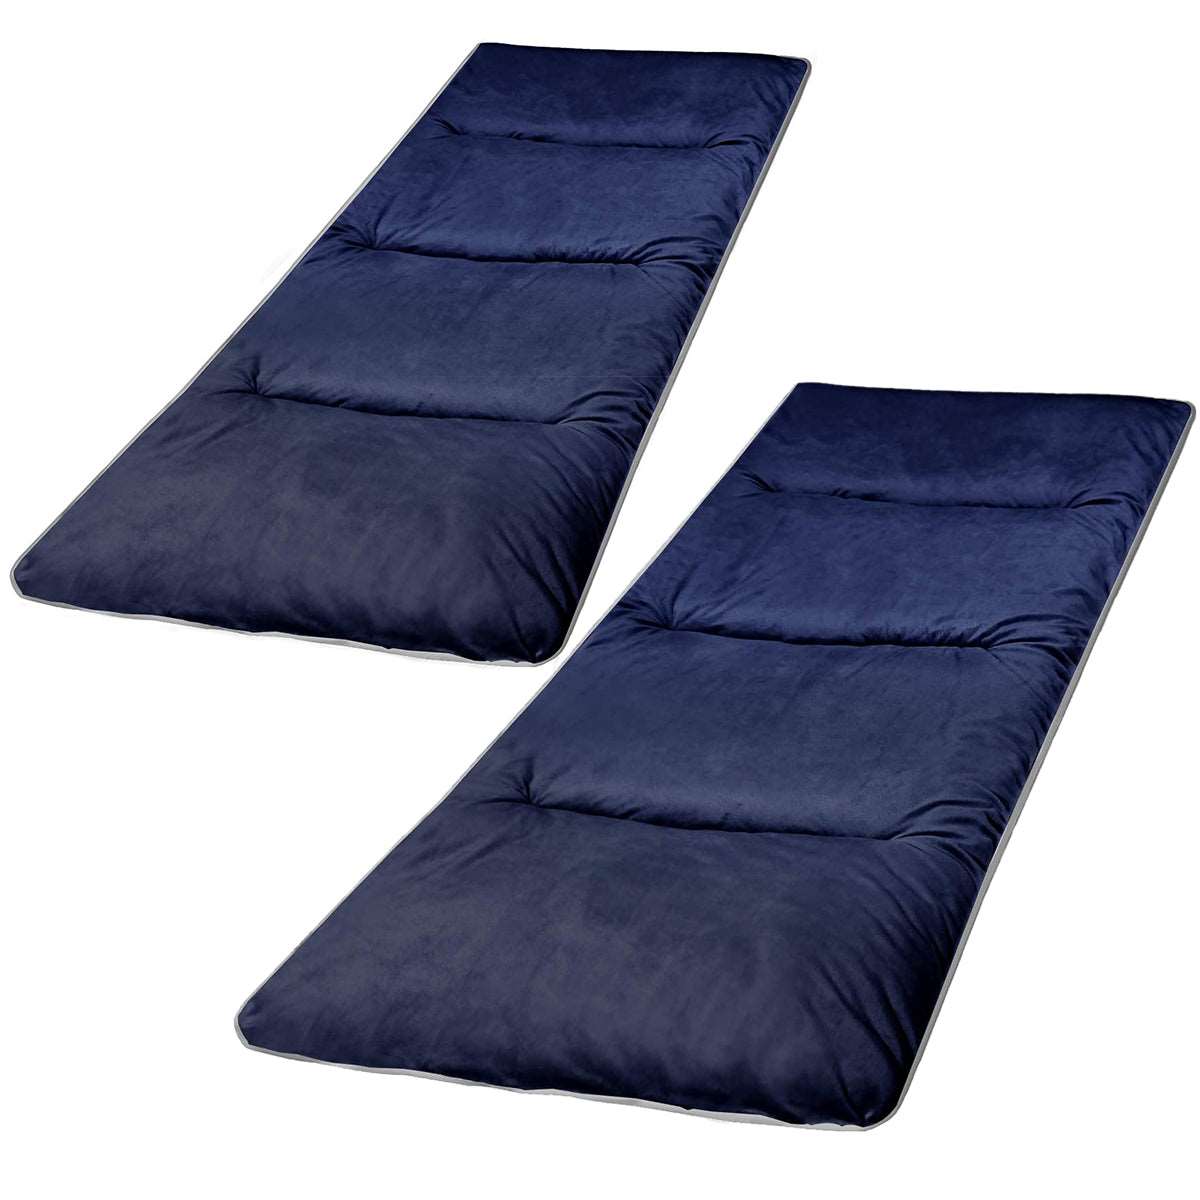 Cot Pads for Camping, Soft Comfortable Cotton Sleeping Cot Mattress Pad